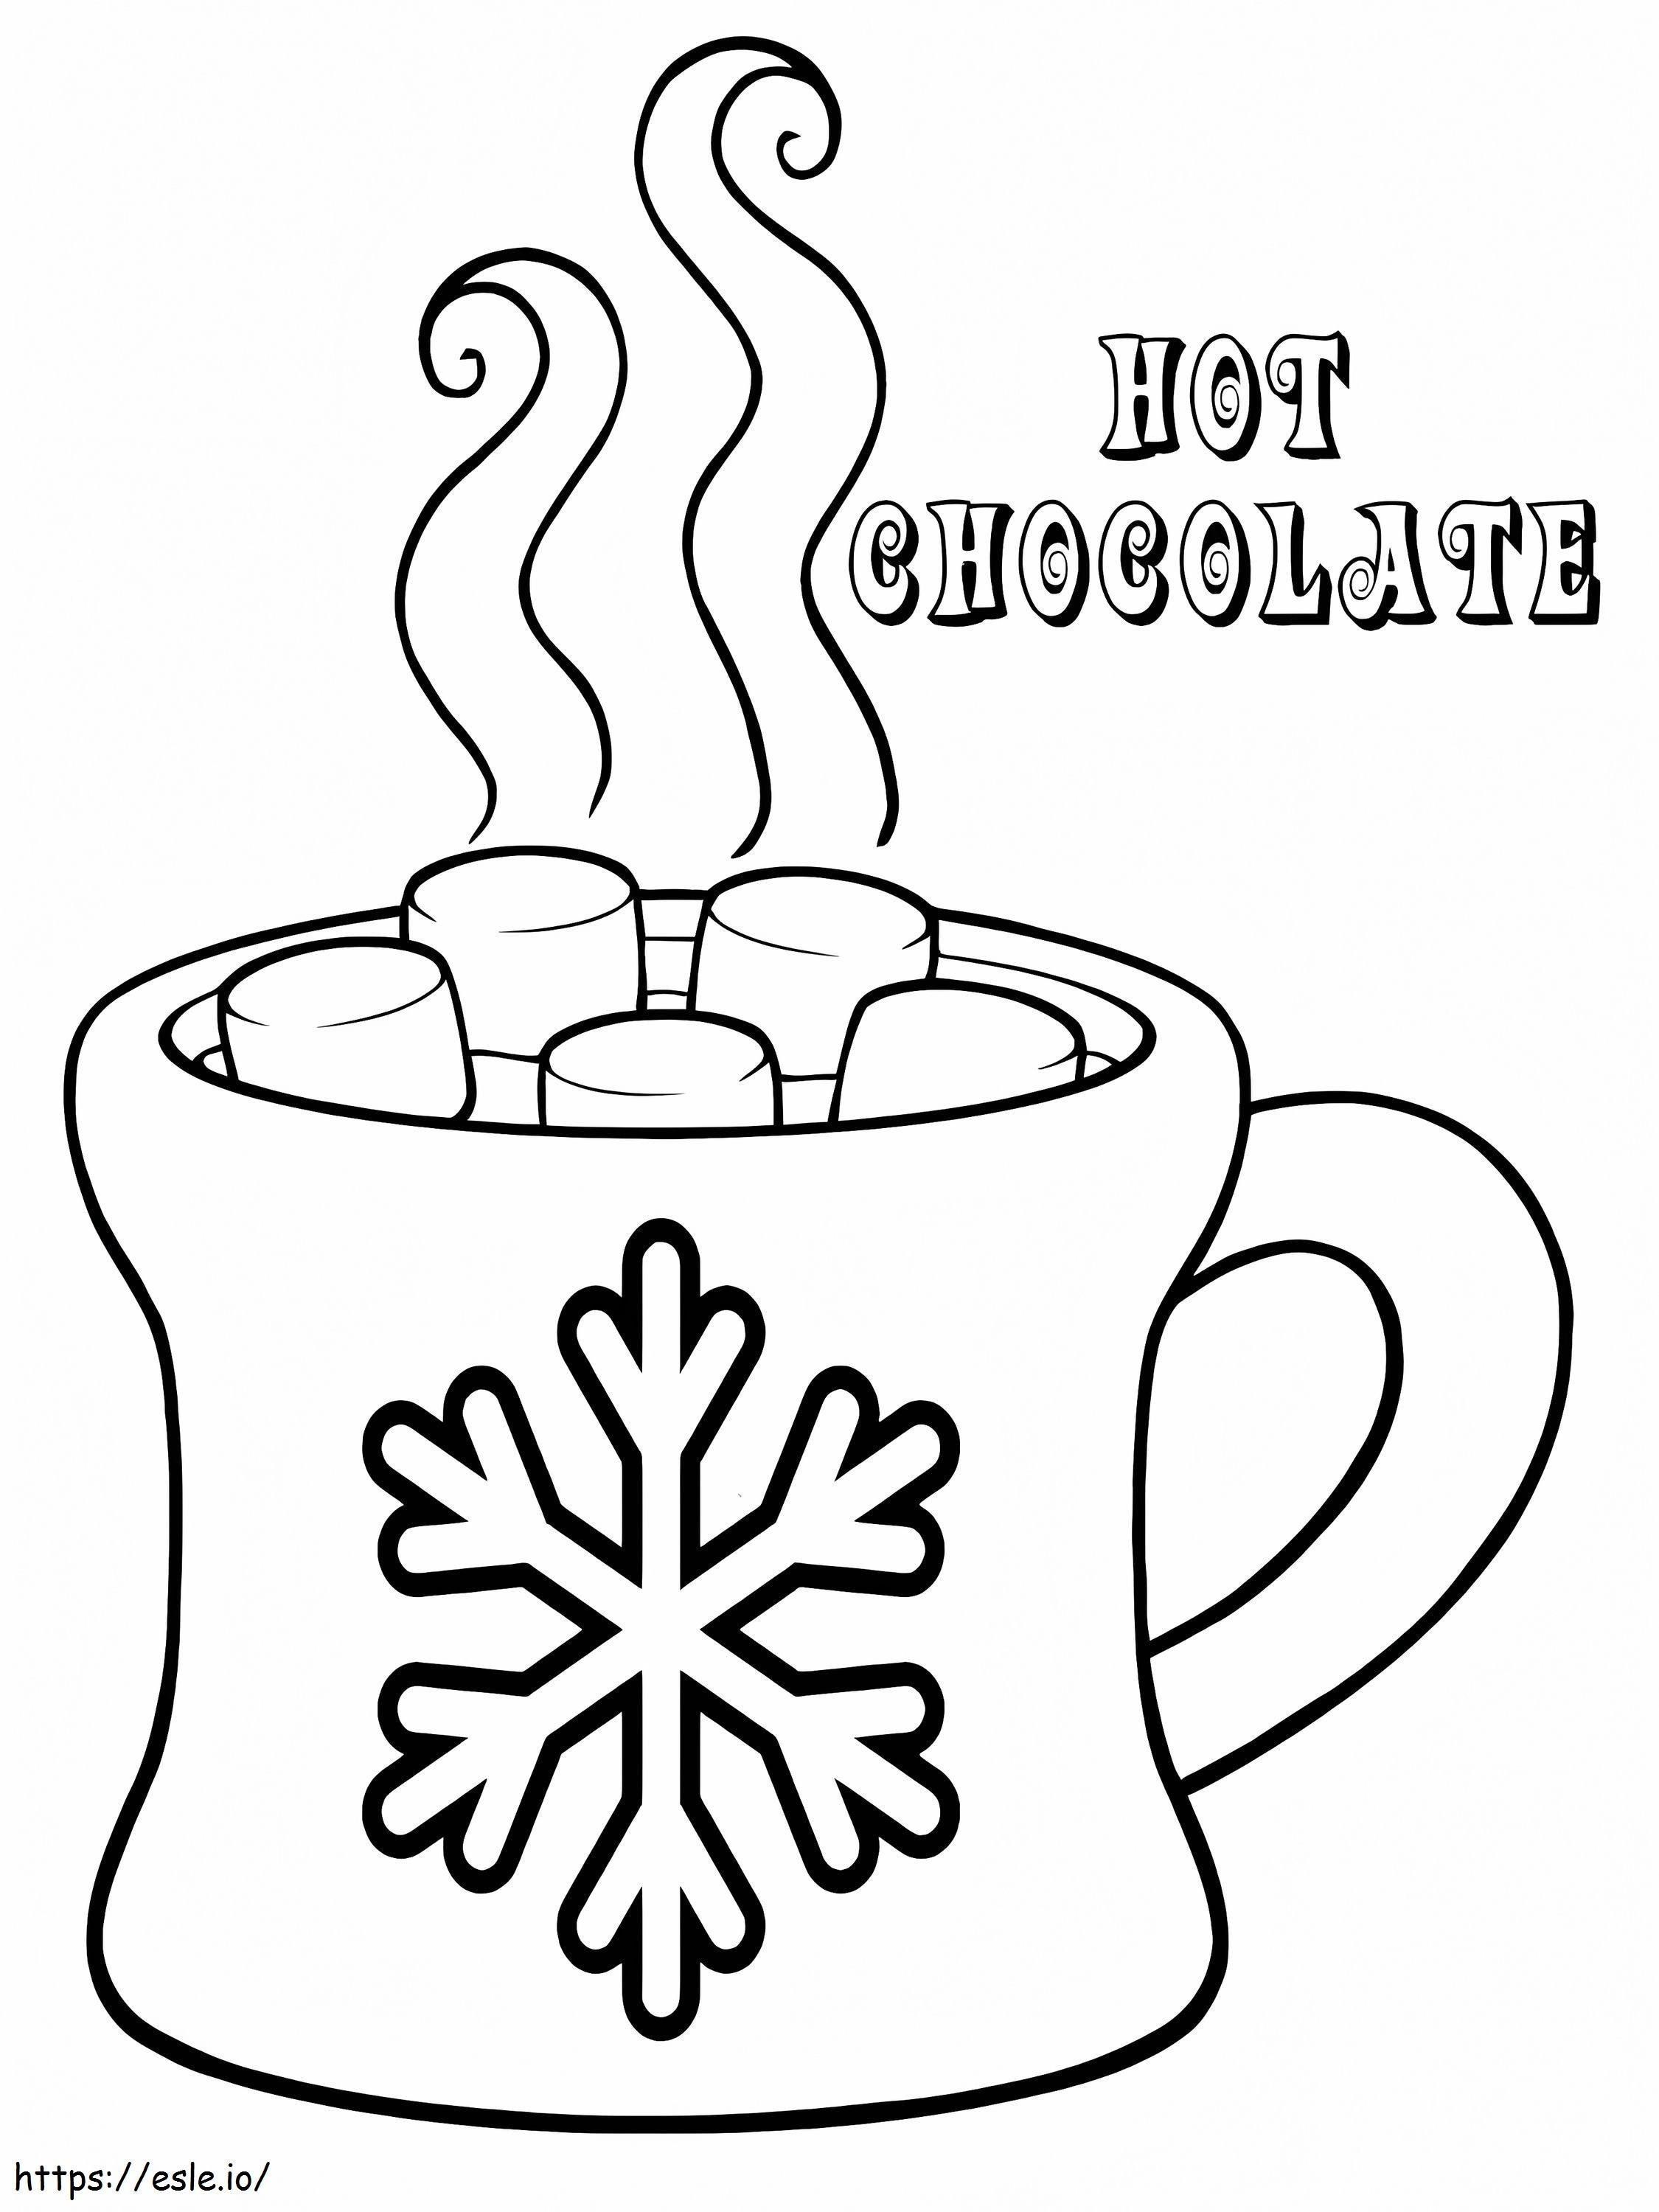 Christmas Hot Chocolate coloring page